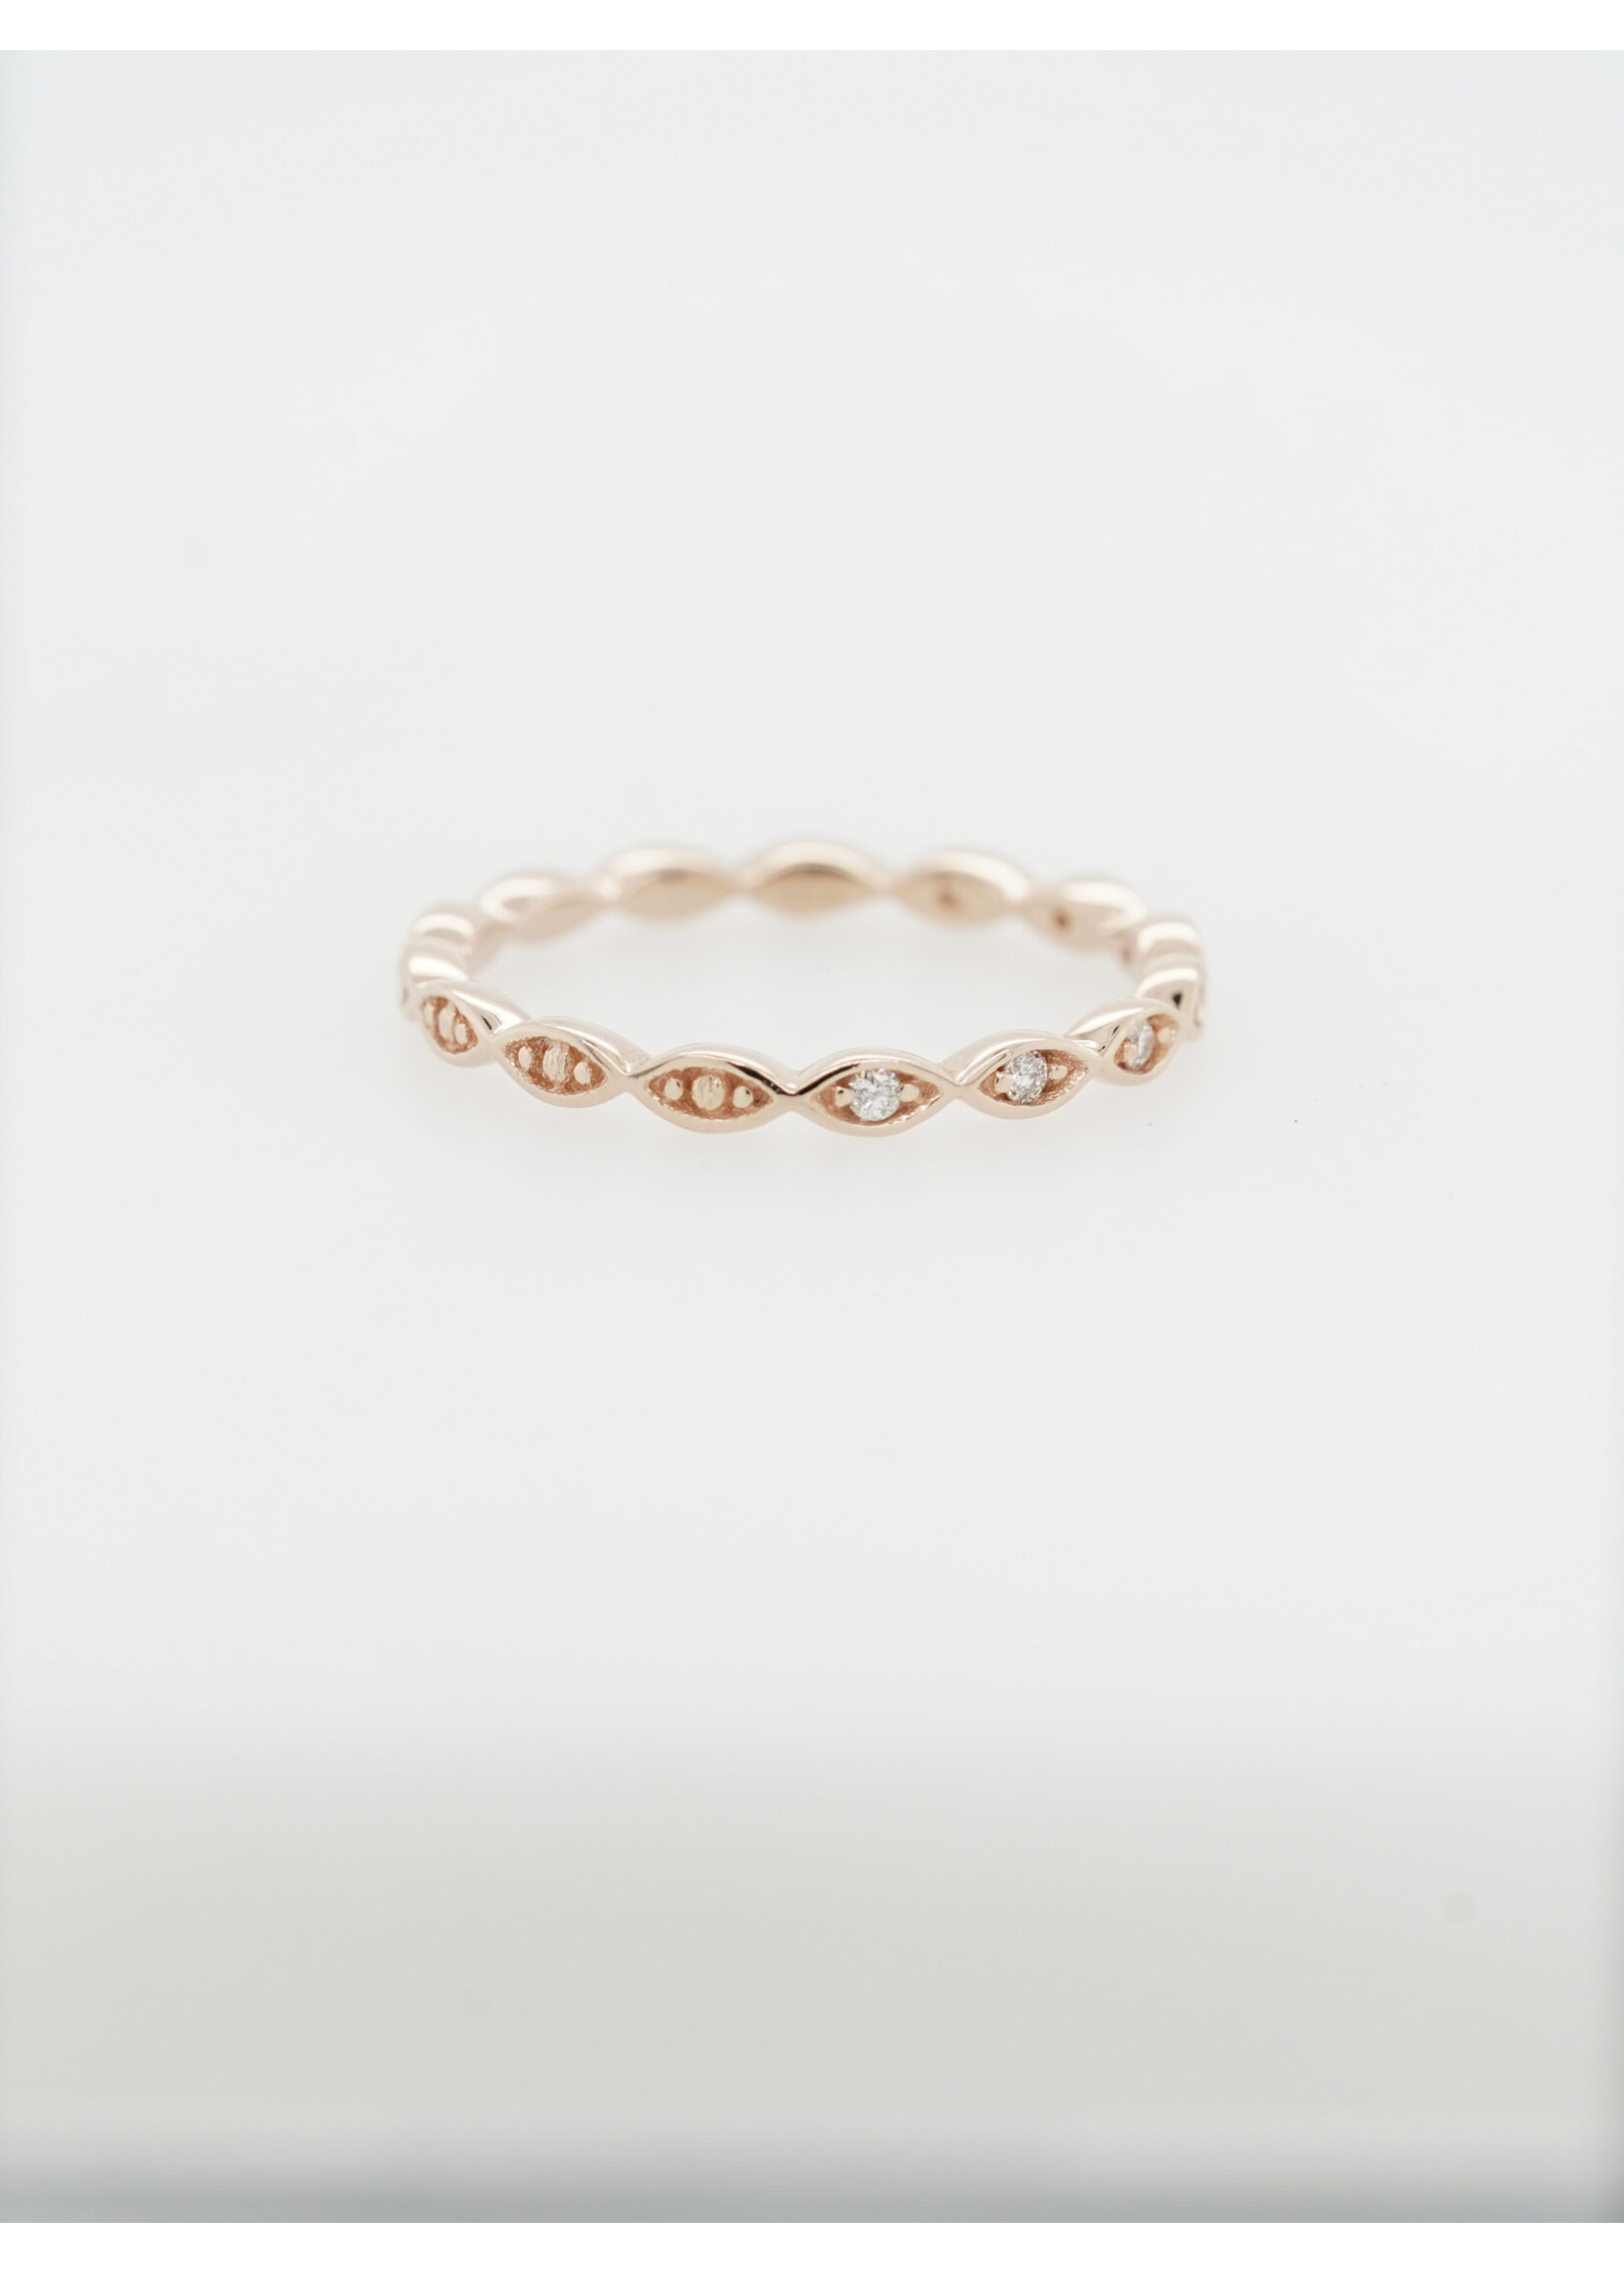 14KR 1.7g .09ctw Diamond Stackable Band (size 7)